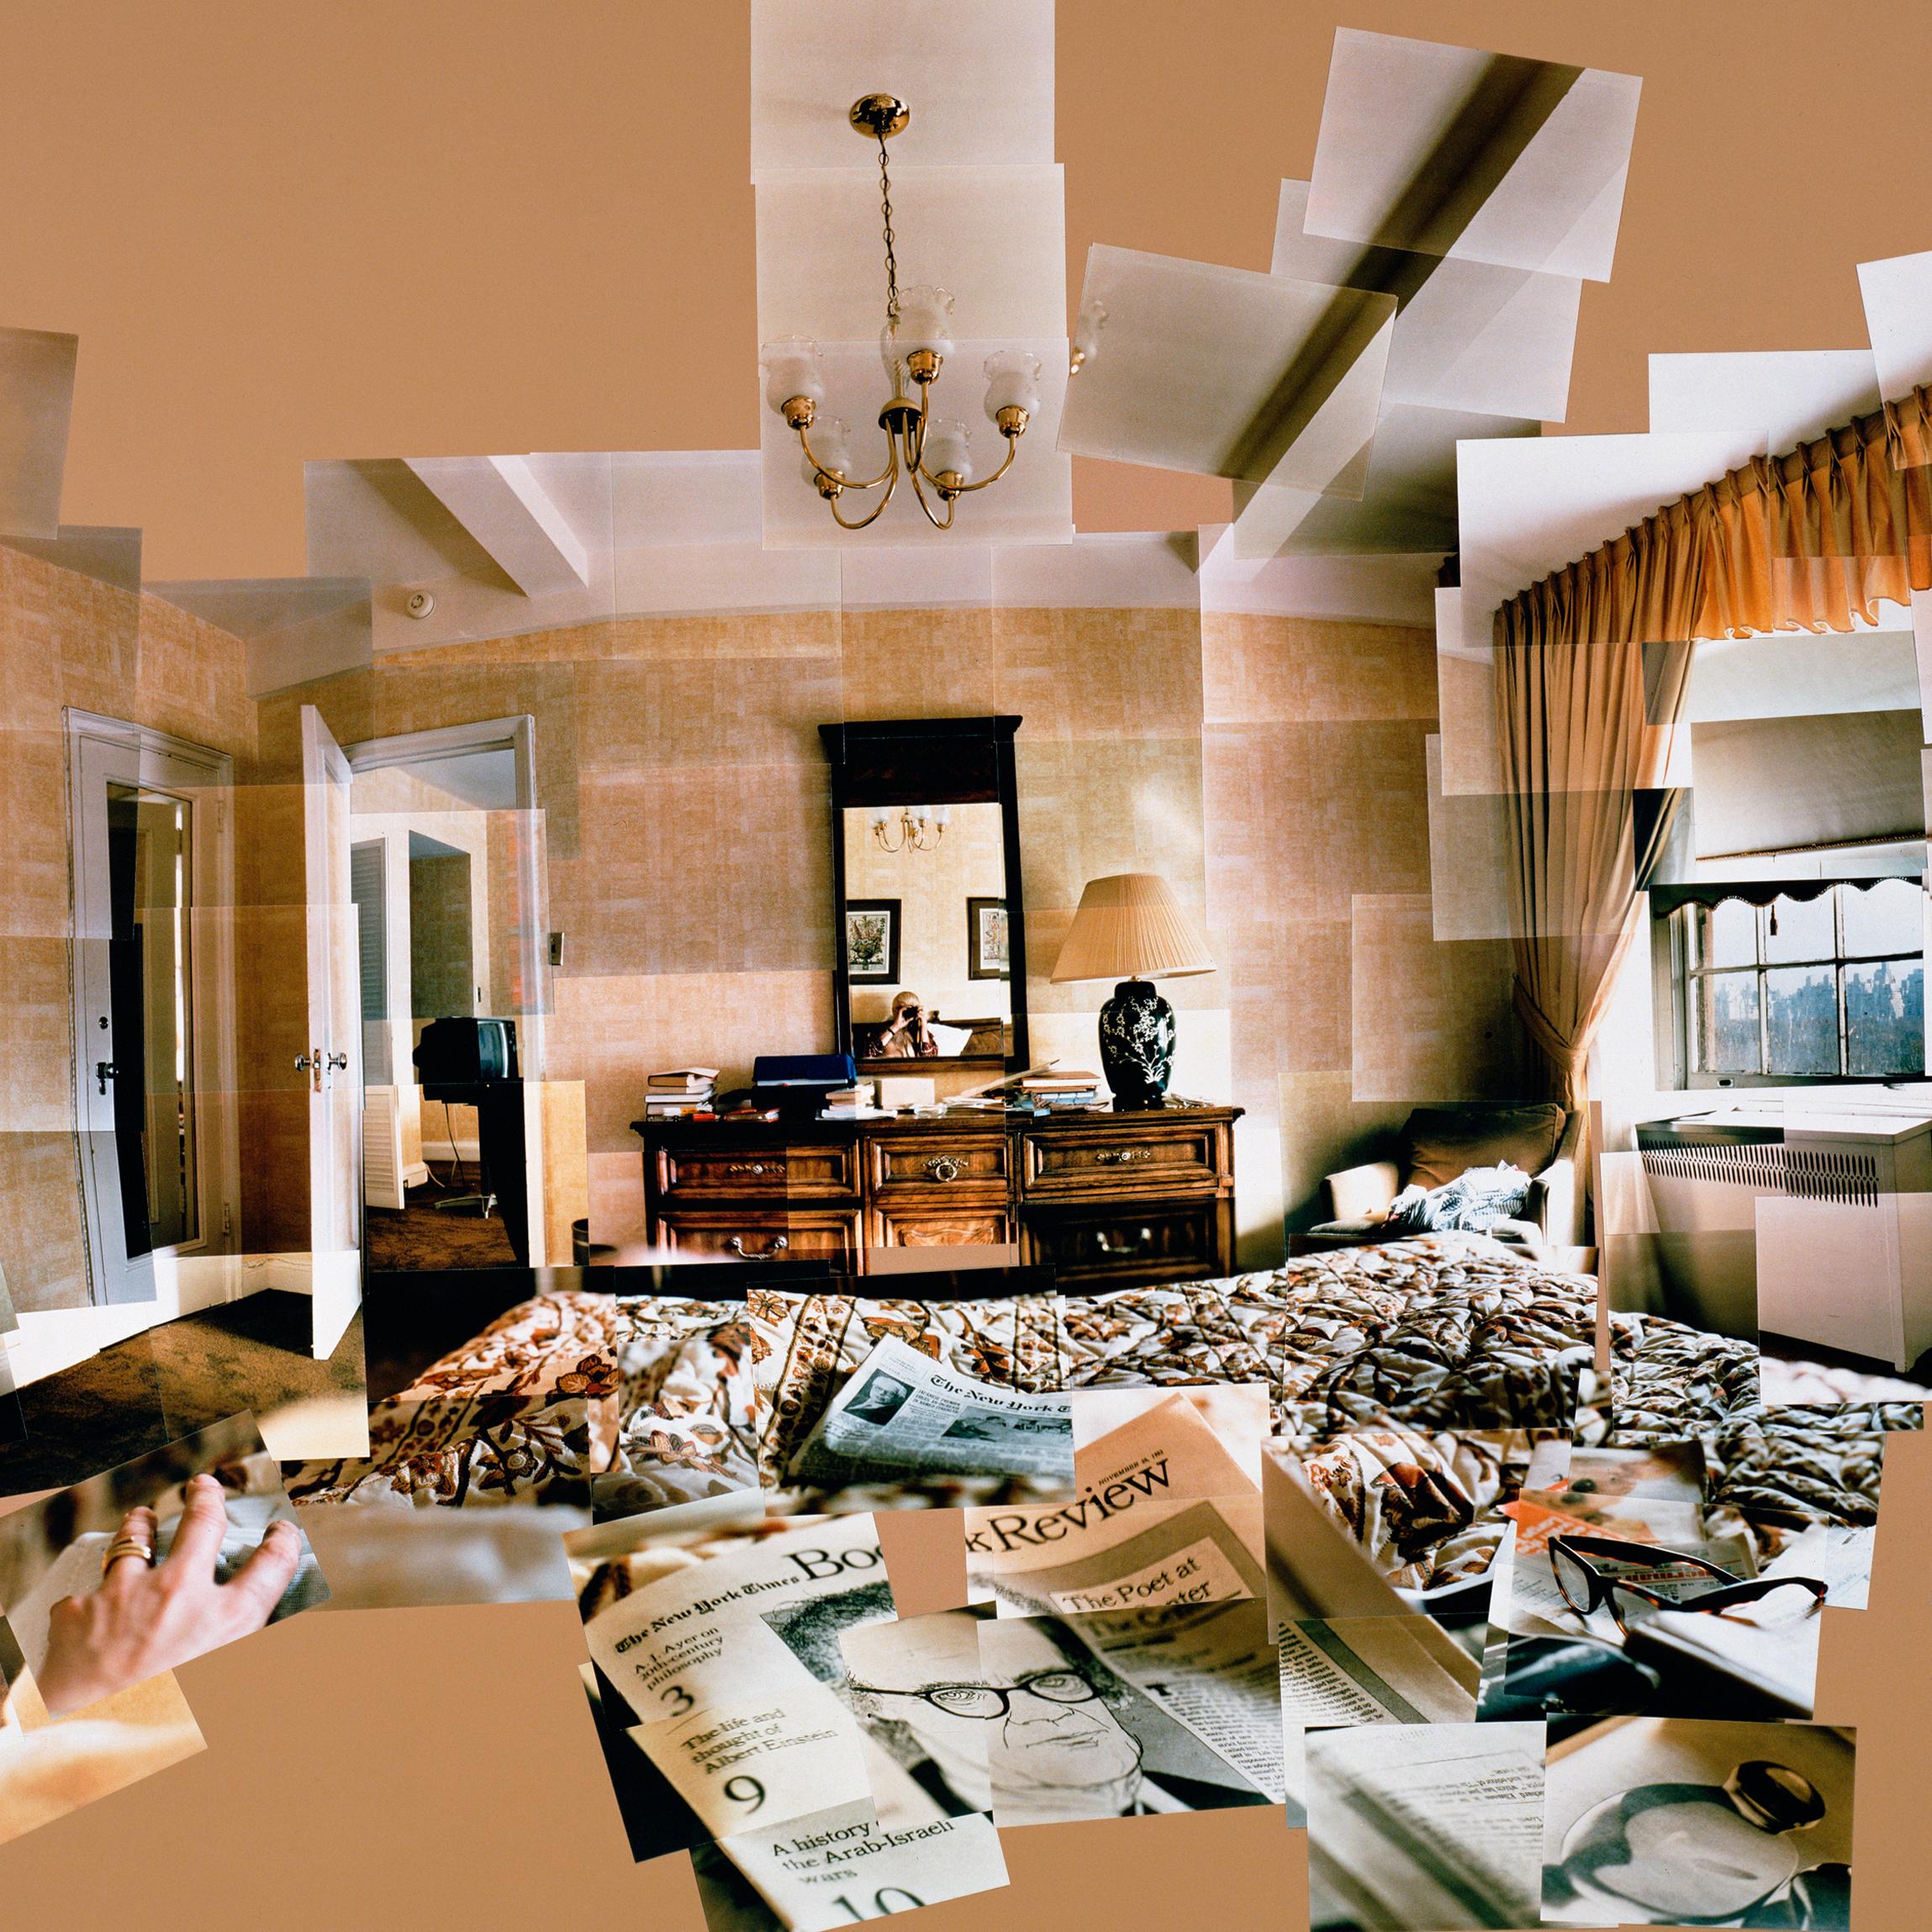 This Hockney photographic collage depicts the artist in his suite at the Mayflower Hotel while preparing designs for the sets and costumes of a French Triple Bill of opera and ballet at Lincoln Center, New York. Decorated in earth tones and shades